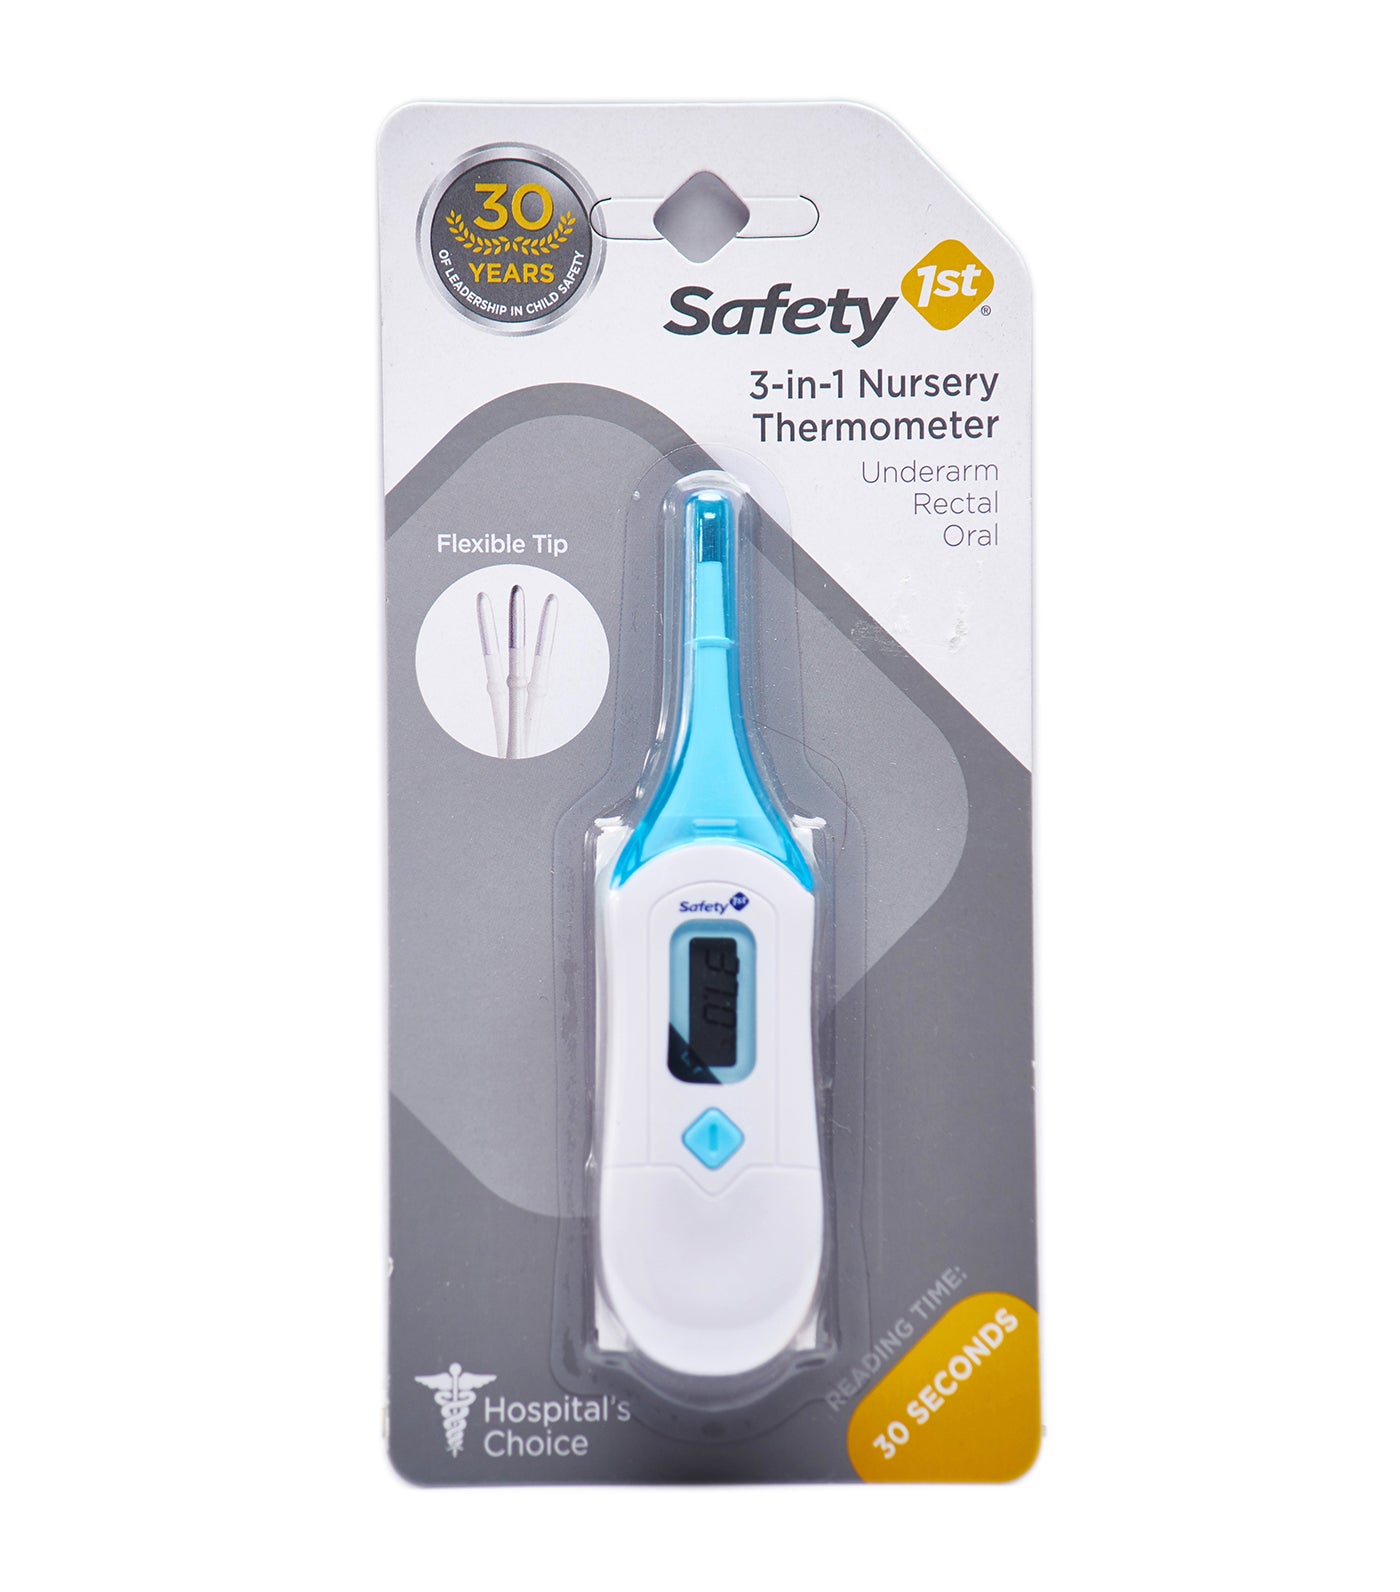 Safety 1st Safety 1st 3 in 1 Nursery Thermometer - Arctic Blue in